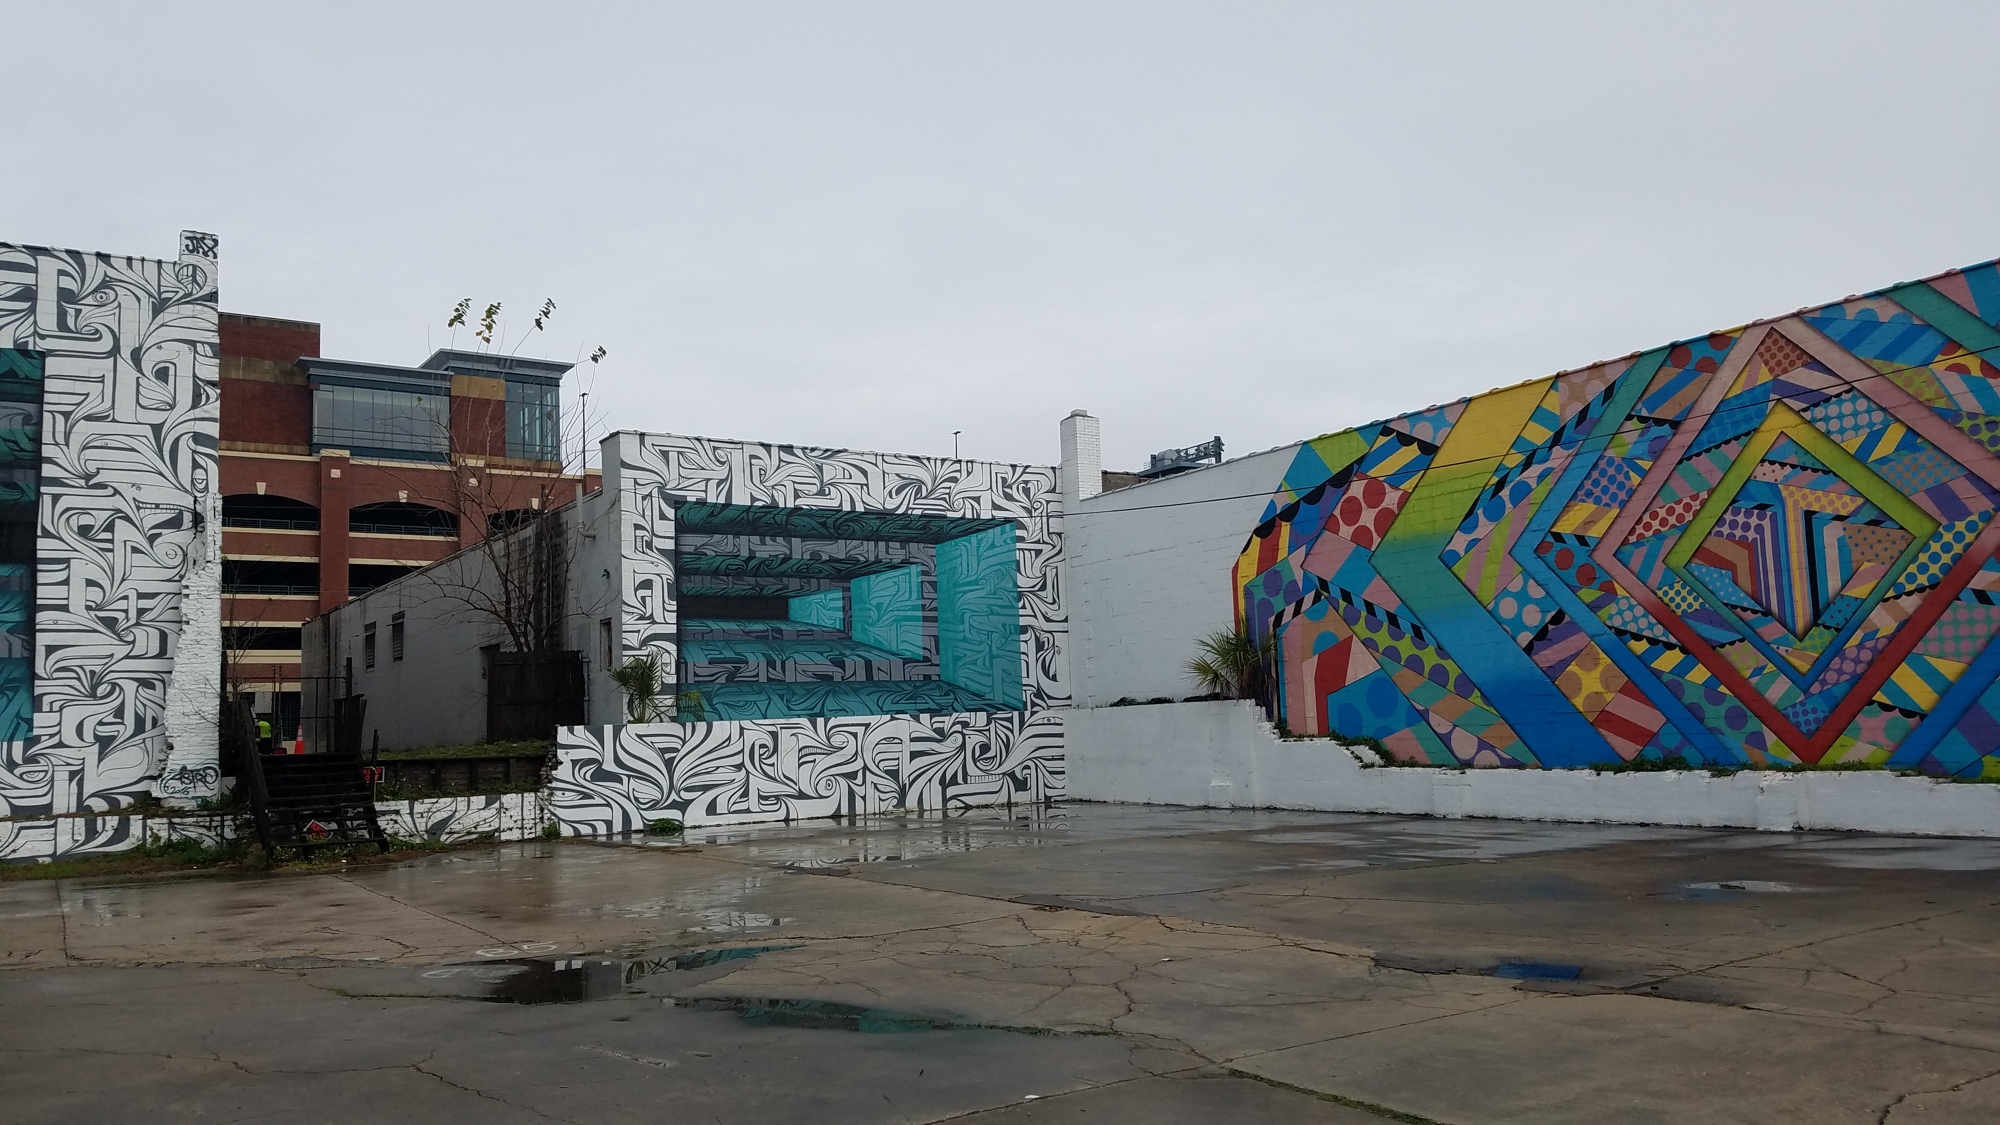 A mural covers the the southwest corner of the Doro Fixture Co. building.